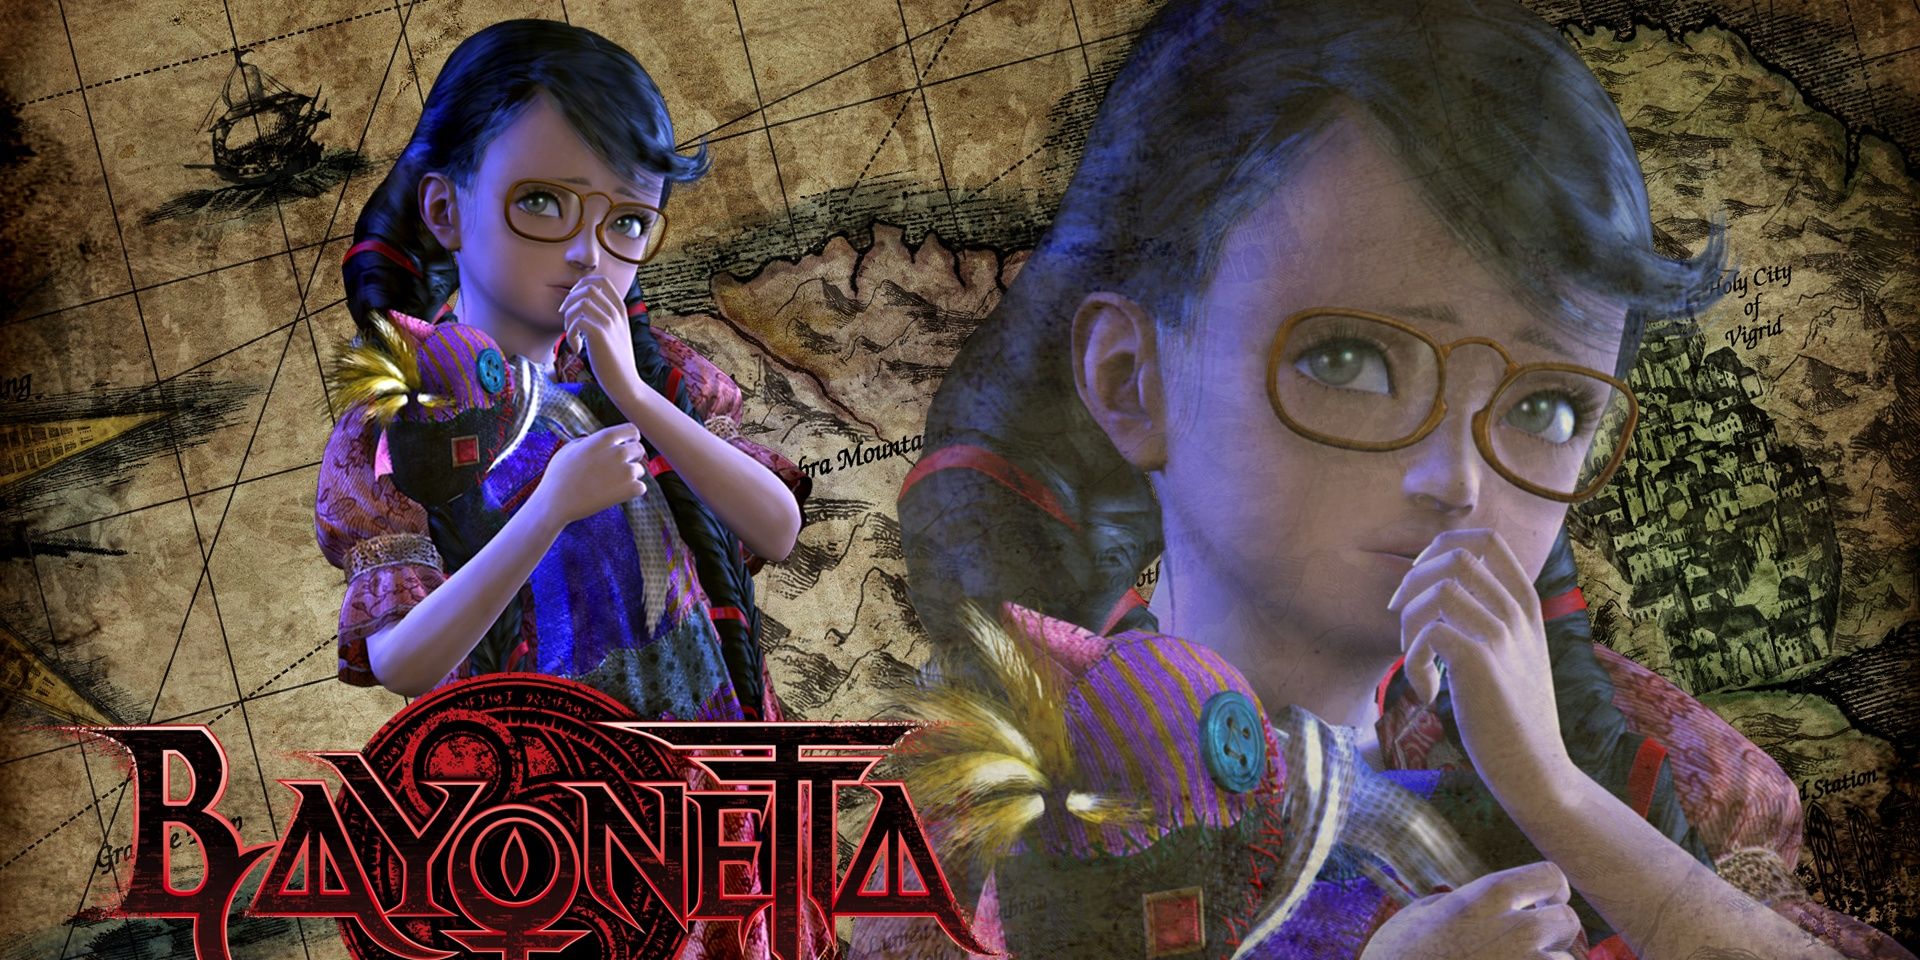 Bayonetta Cereza both at a distance and up close holding her doll, chesire